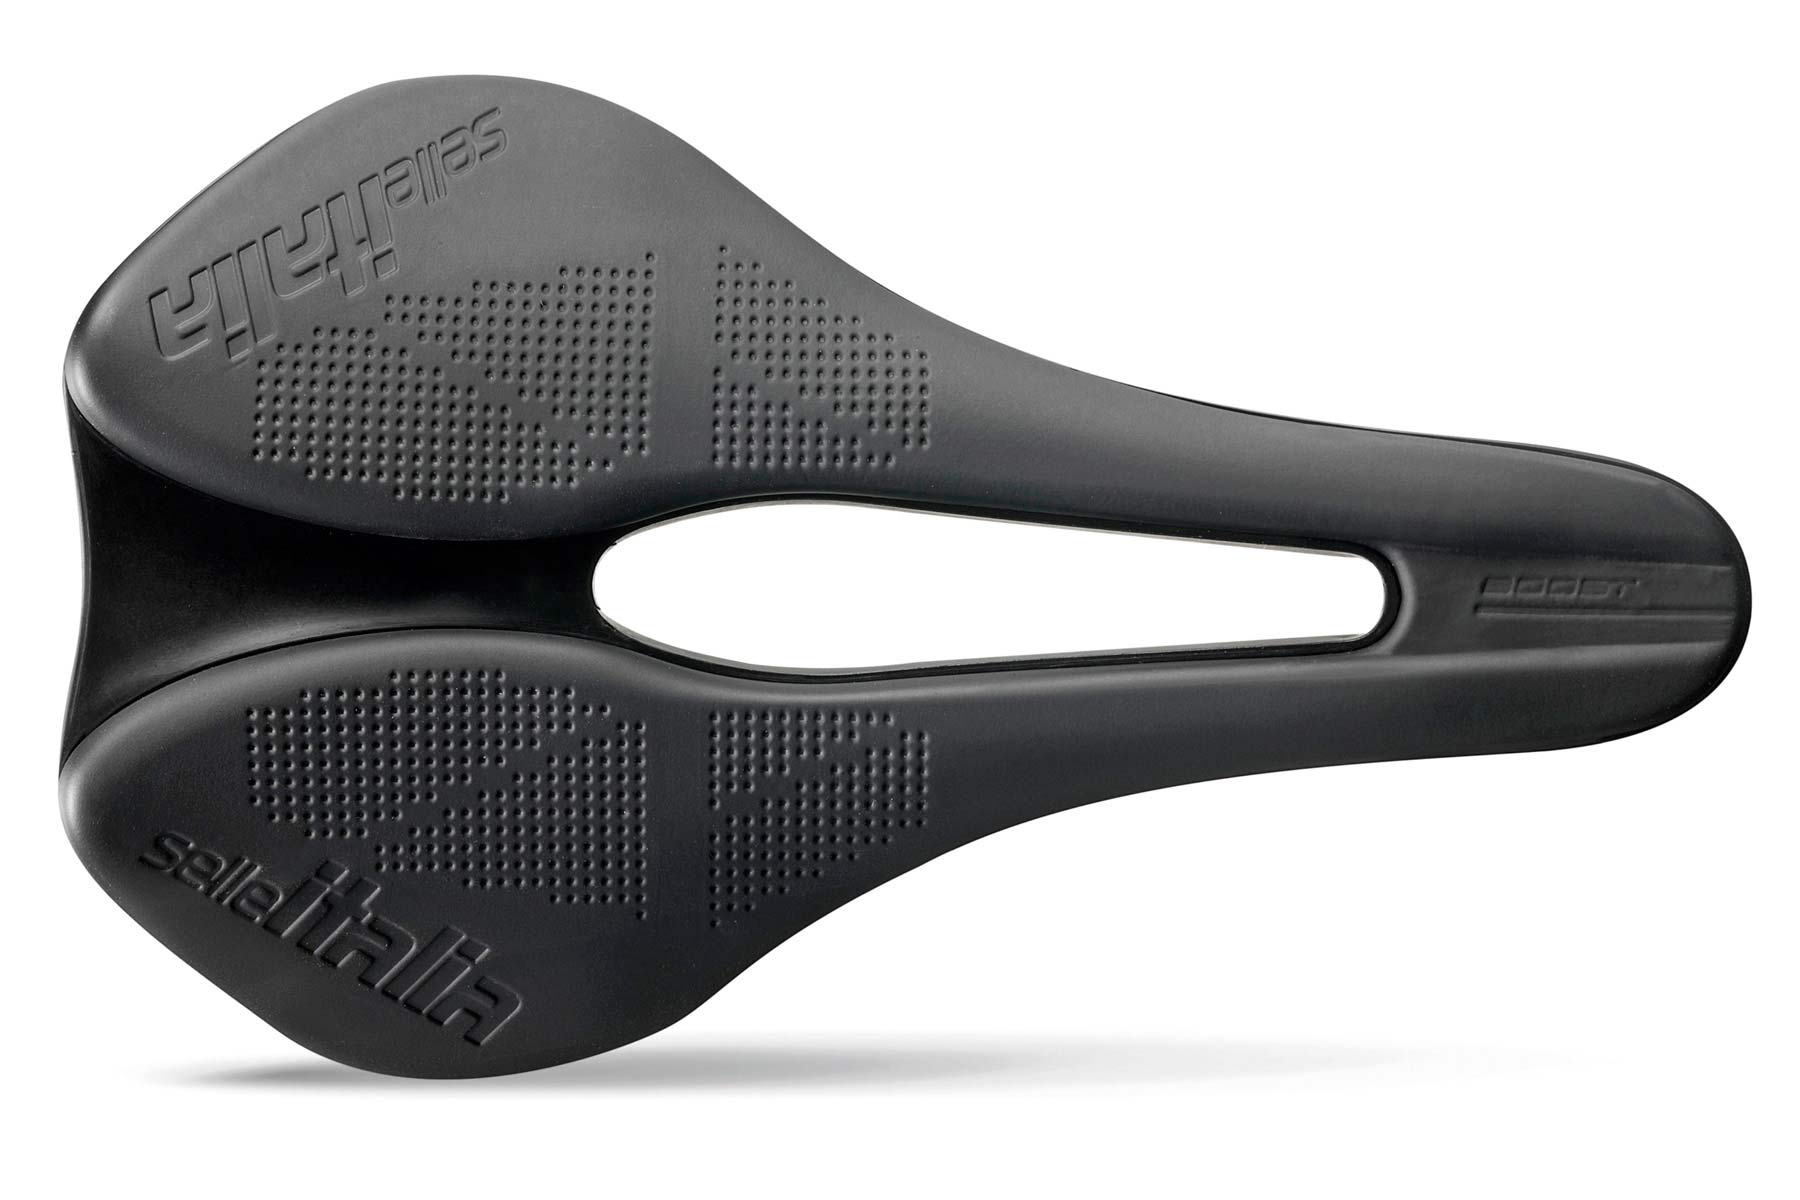 Selle-Italia-X-Tech-prototype-saddle_sustainable-made-in-Italy-robot-manufactured-road-bike-saddle_Boost-top_s.jpg